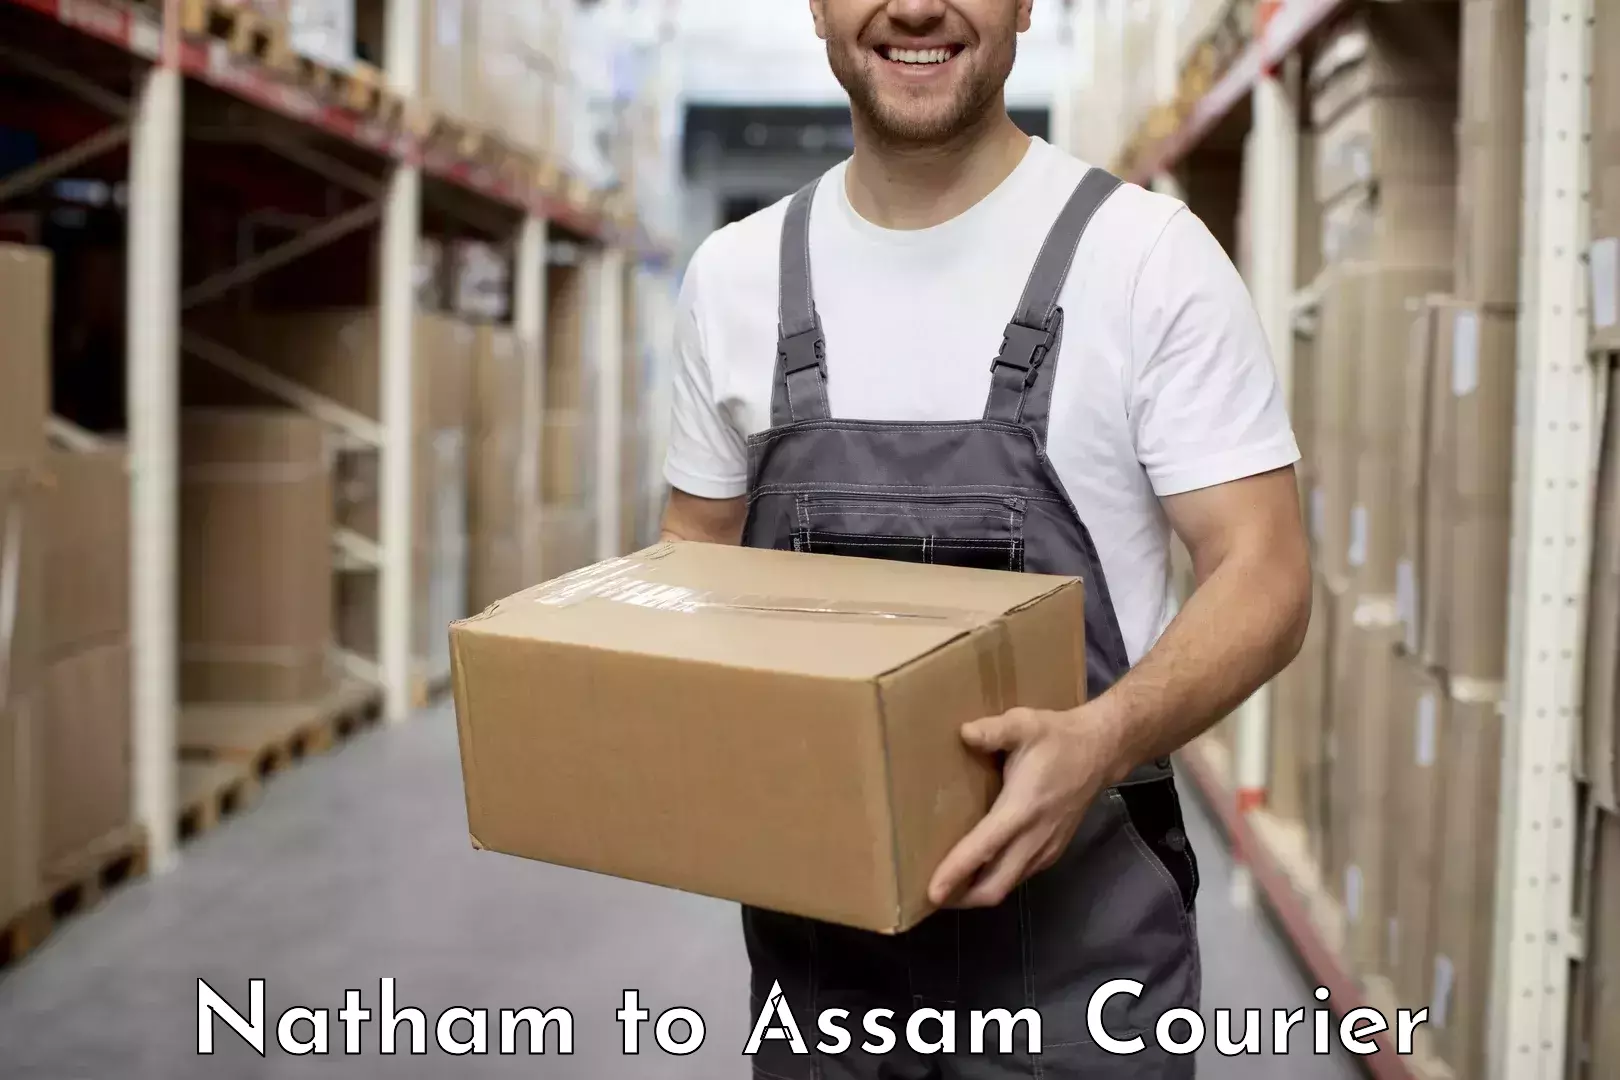 Nationwide parcel services Natham to Assam